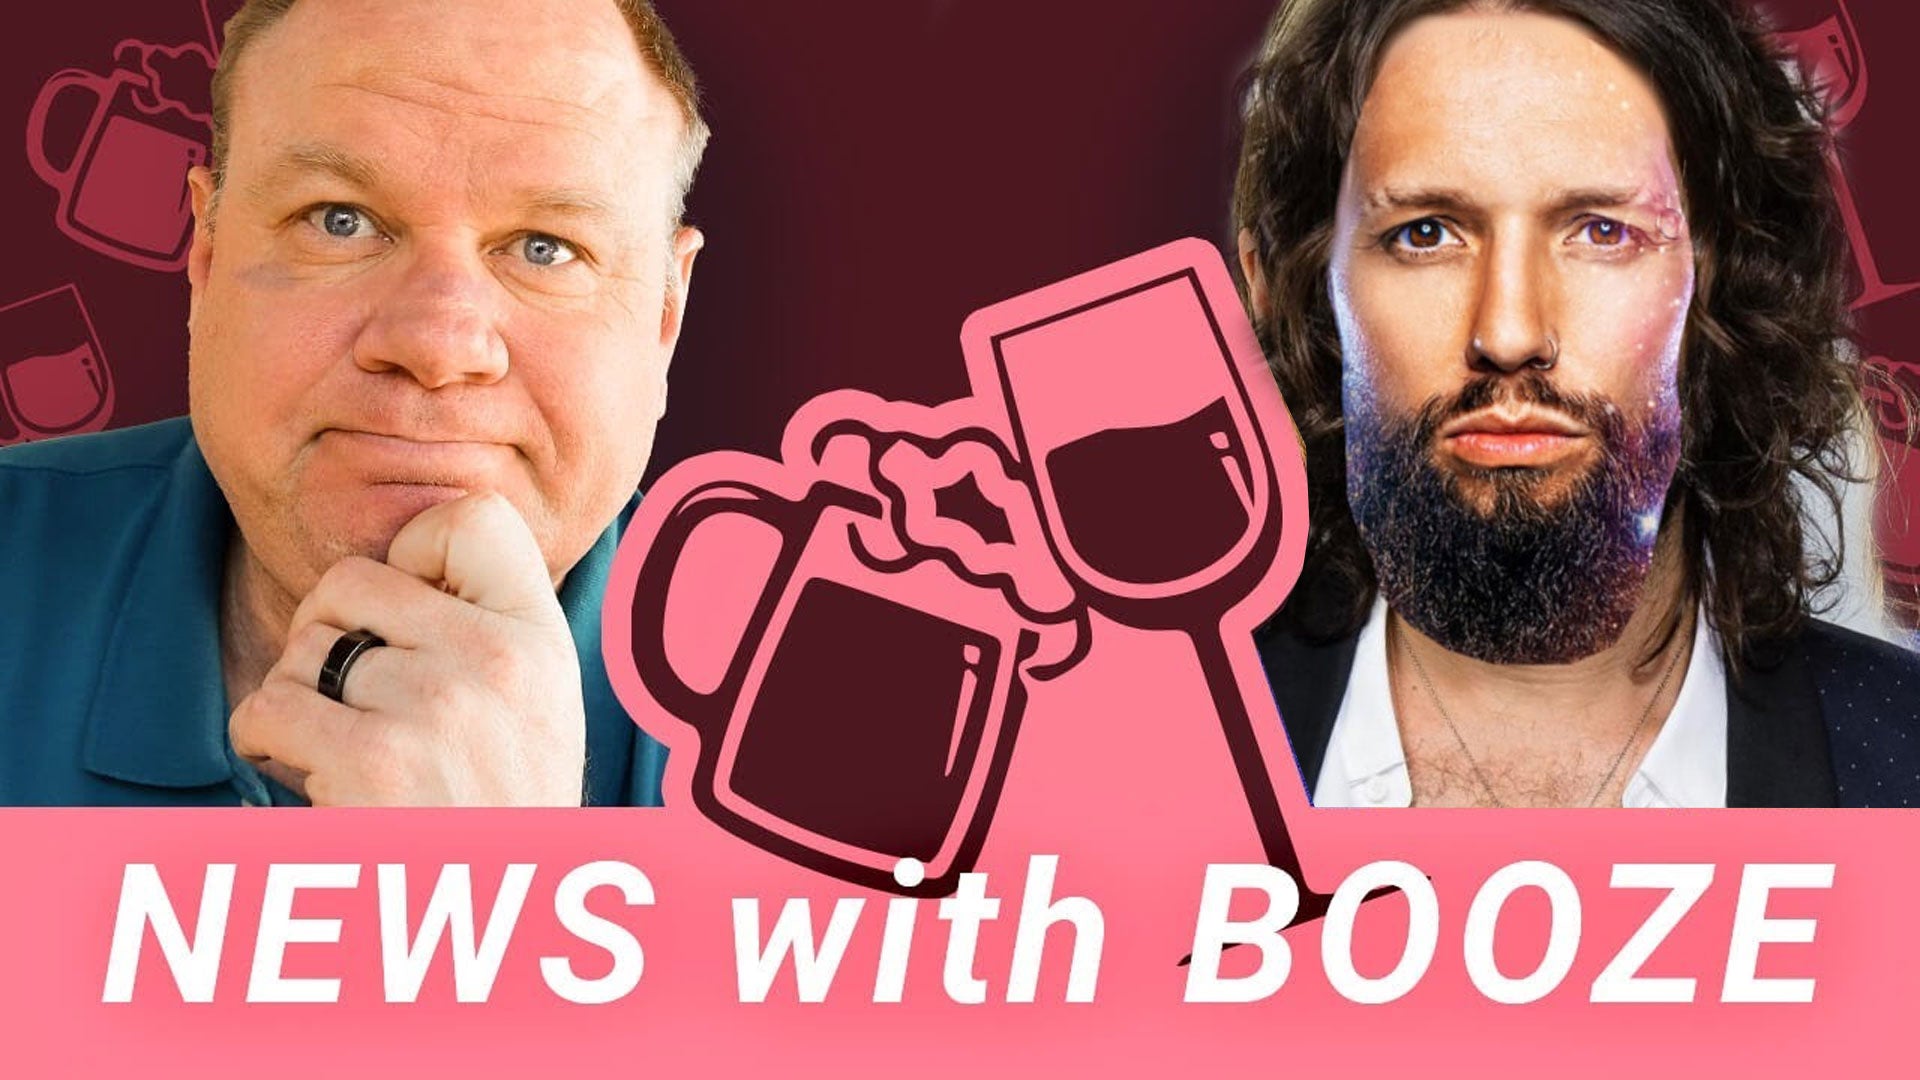 Akira The Don on Eric Hunley's News With Booze Show